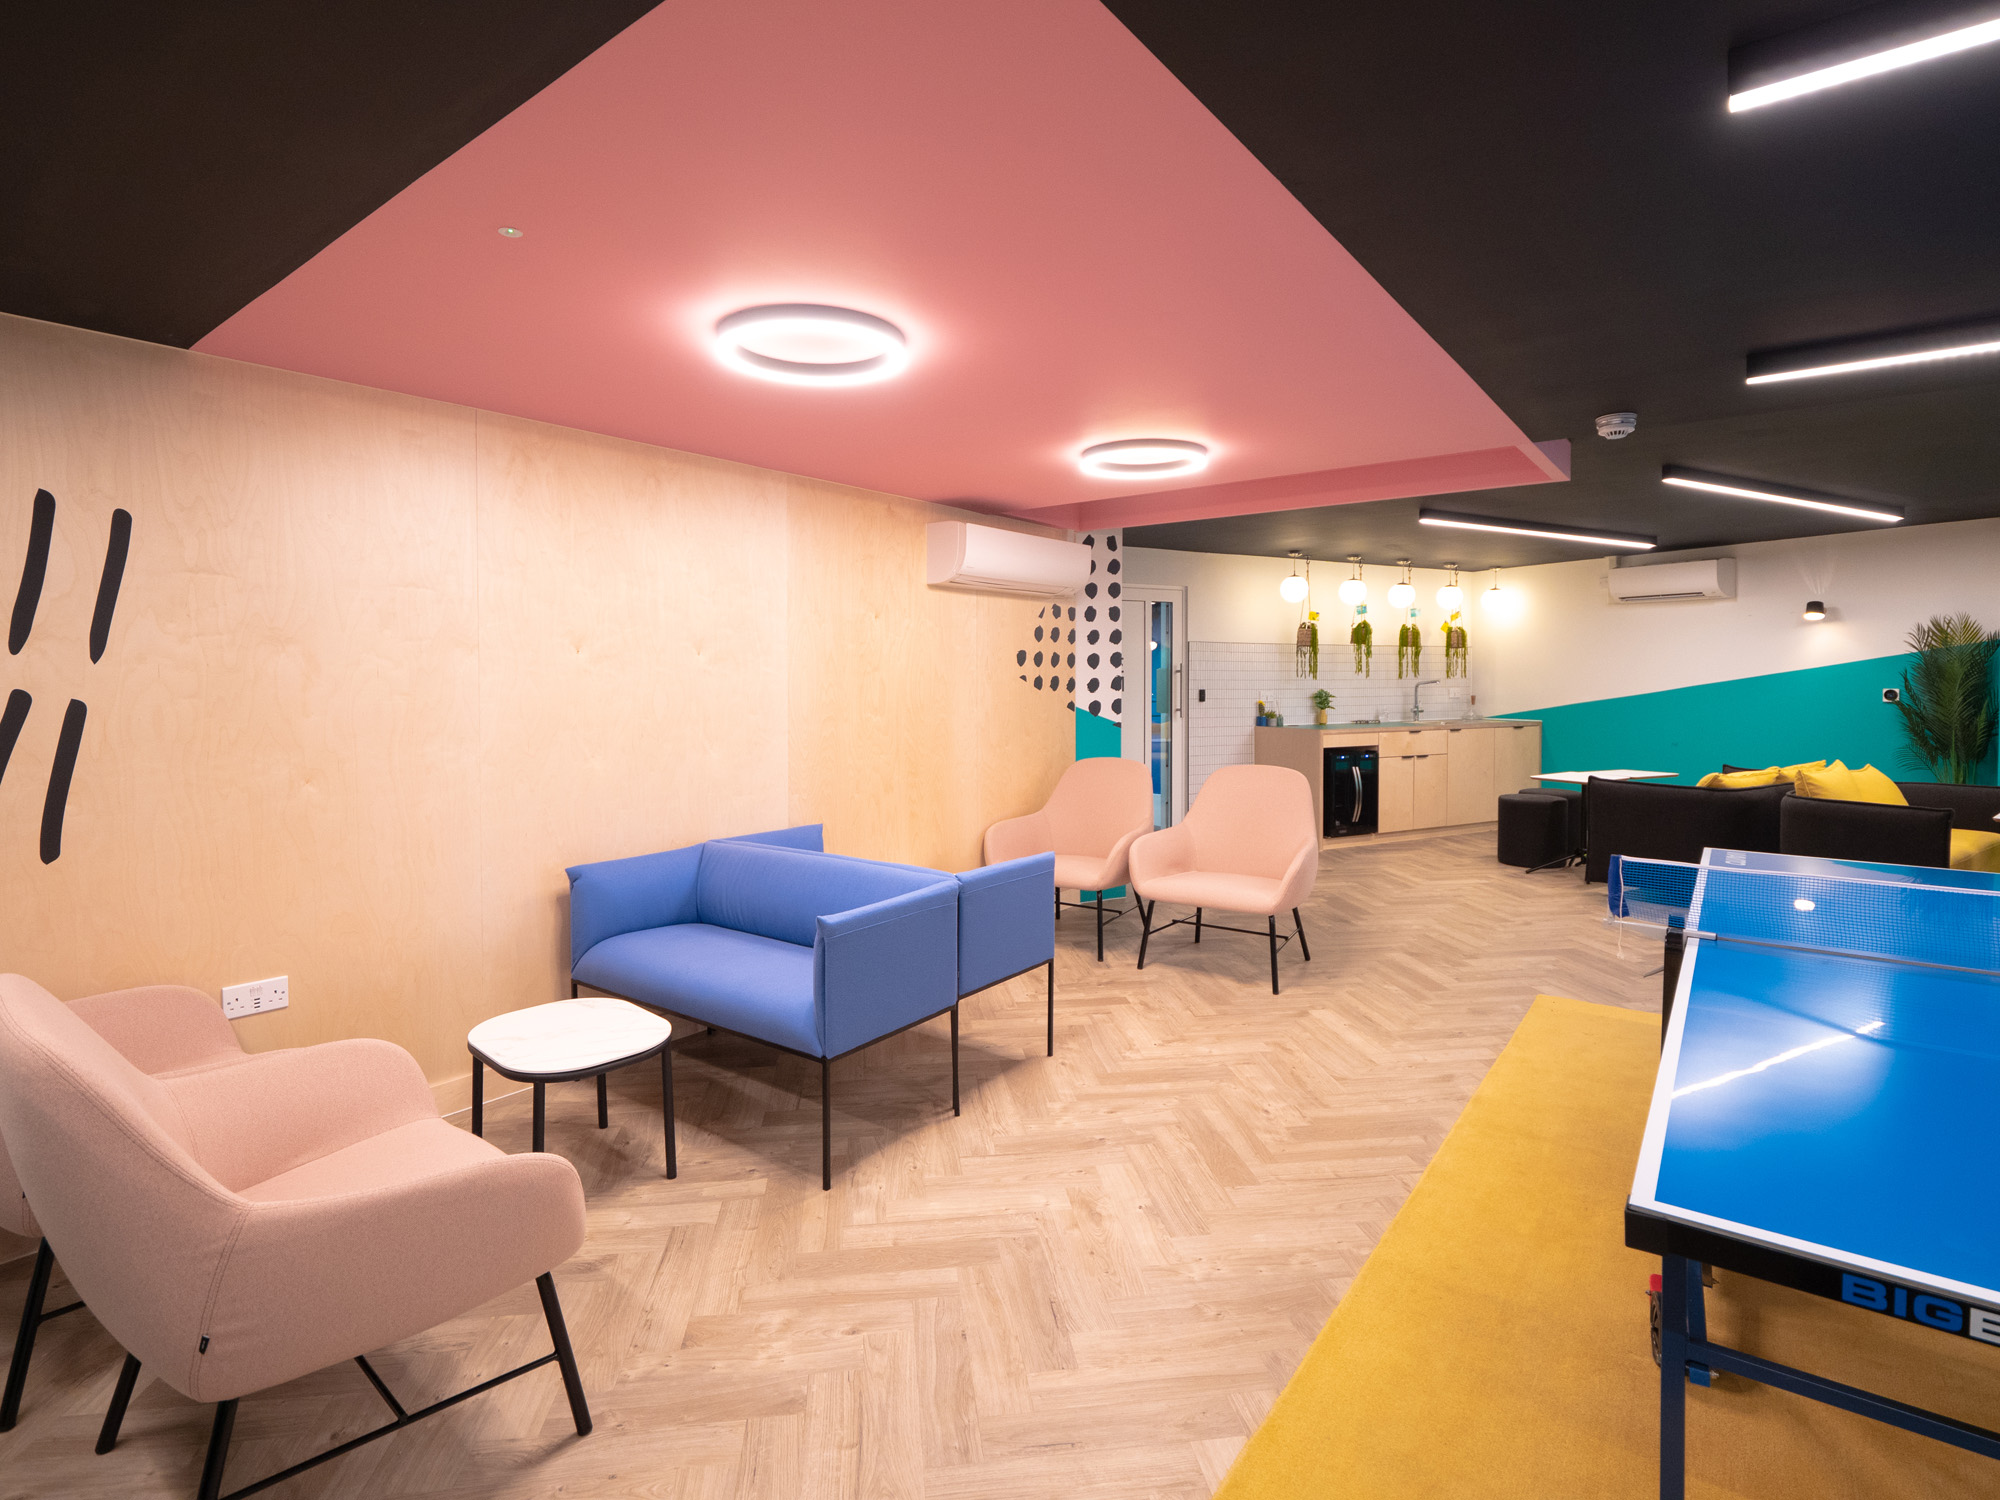 Brightly coloured communal area with a ping pong table and lots of seats